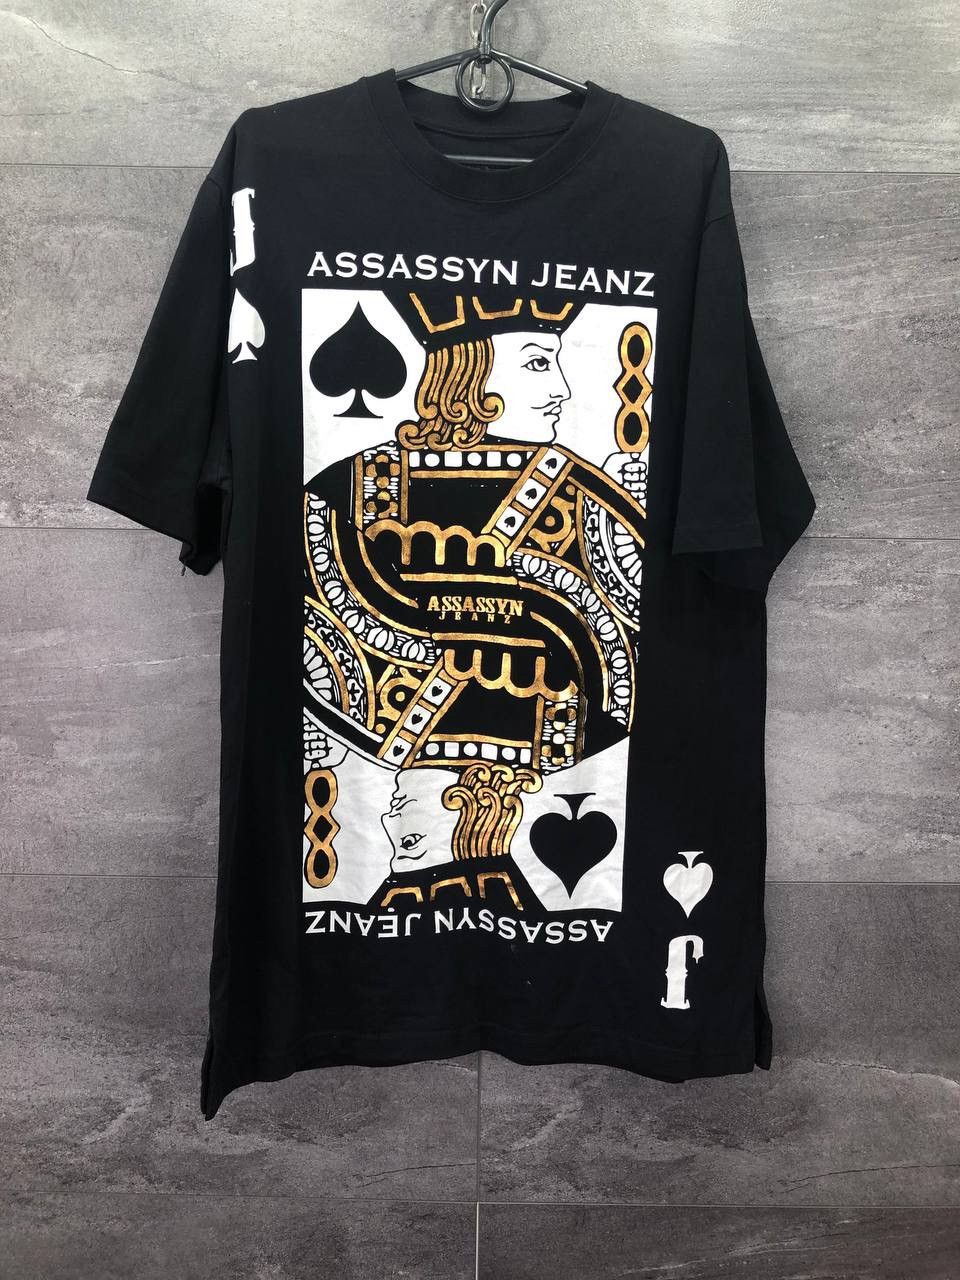 Pre-owned Vintage Assassyn Jeanz Black T-shirt Japanese Style Size M